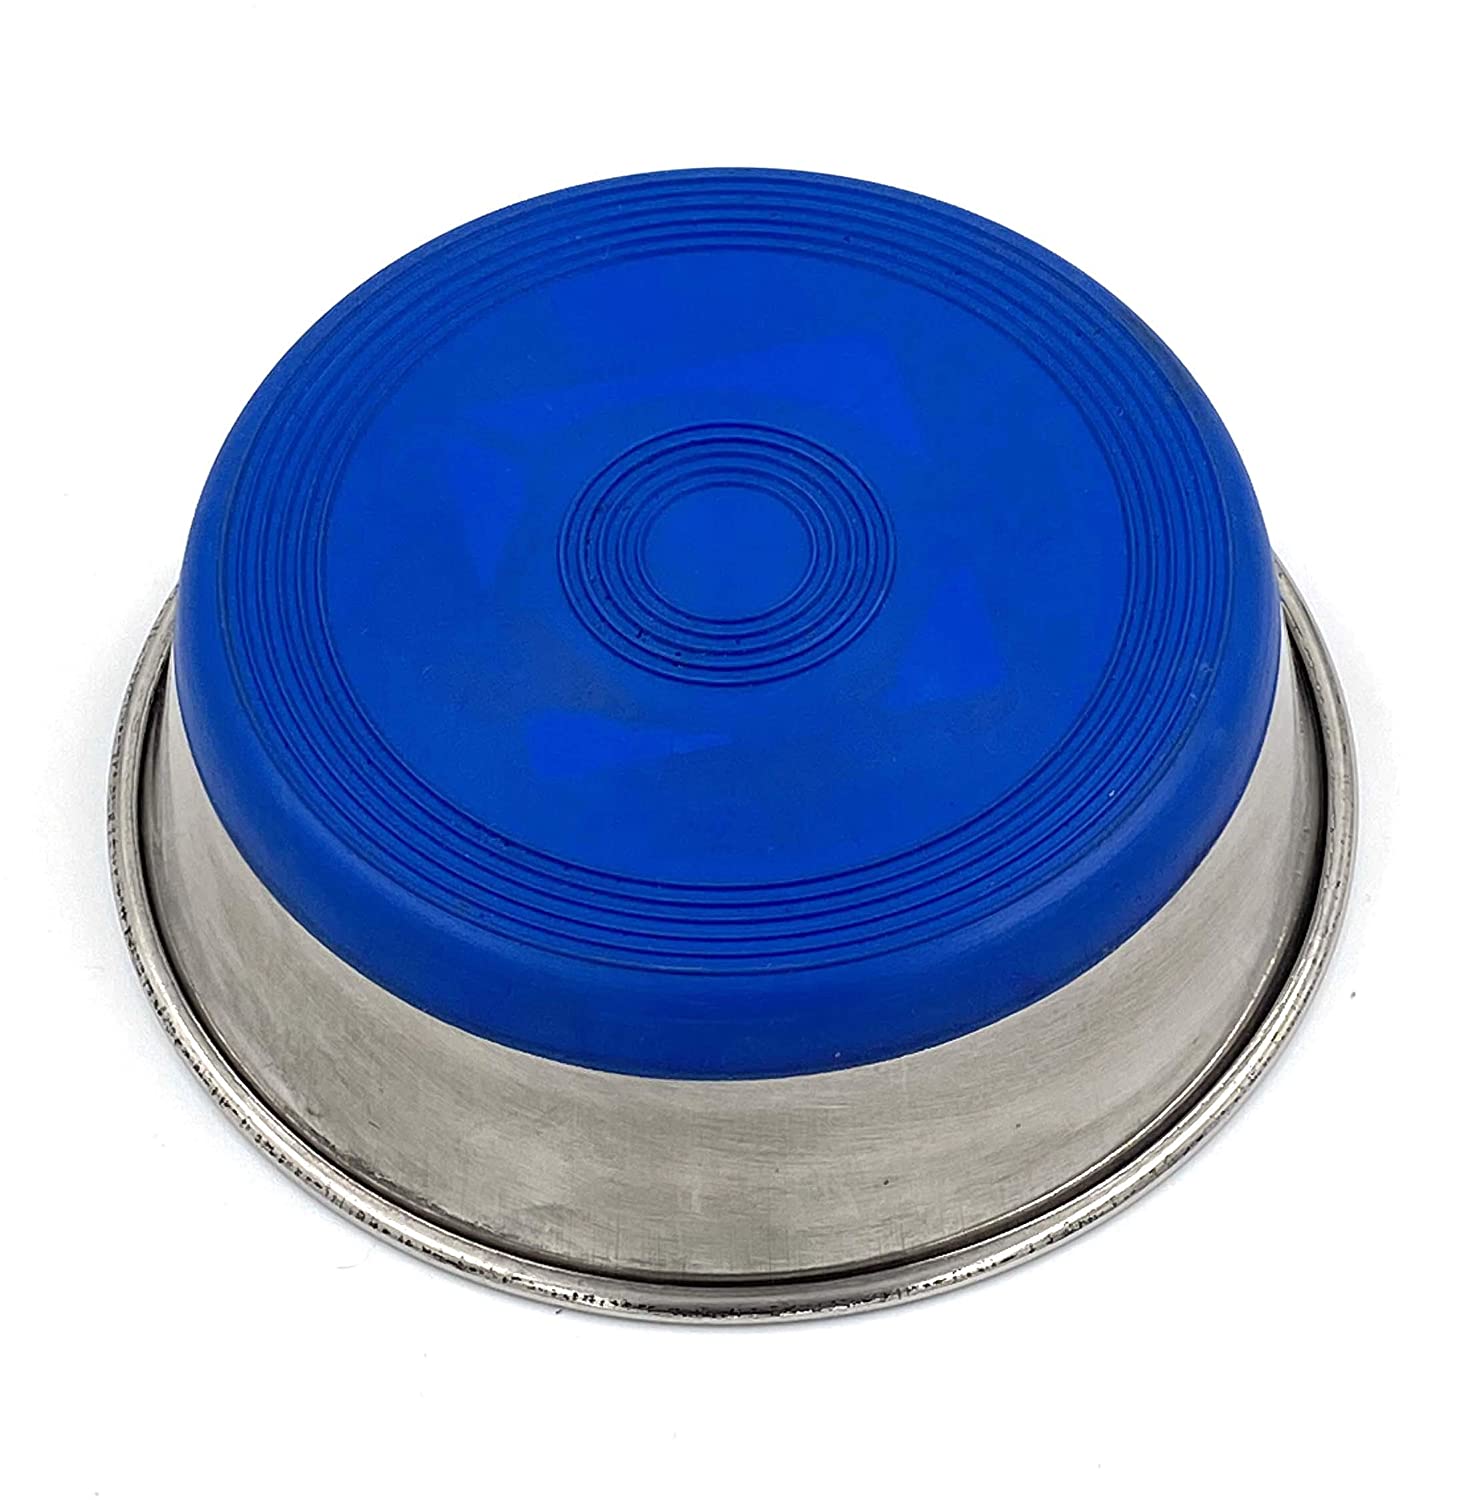 Gorilla Pets Stainless Steel Dog Feeding Bowl Large (Blue Color)